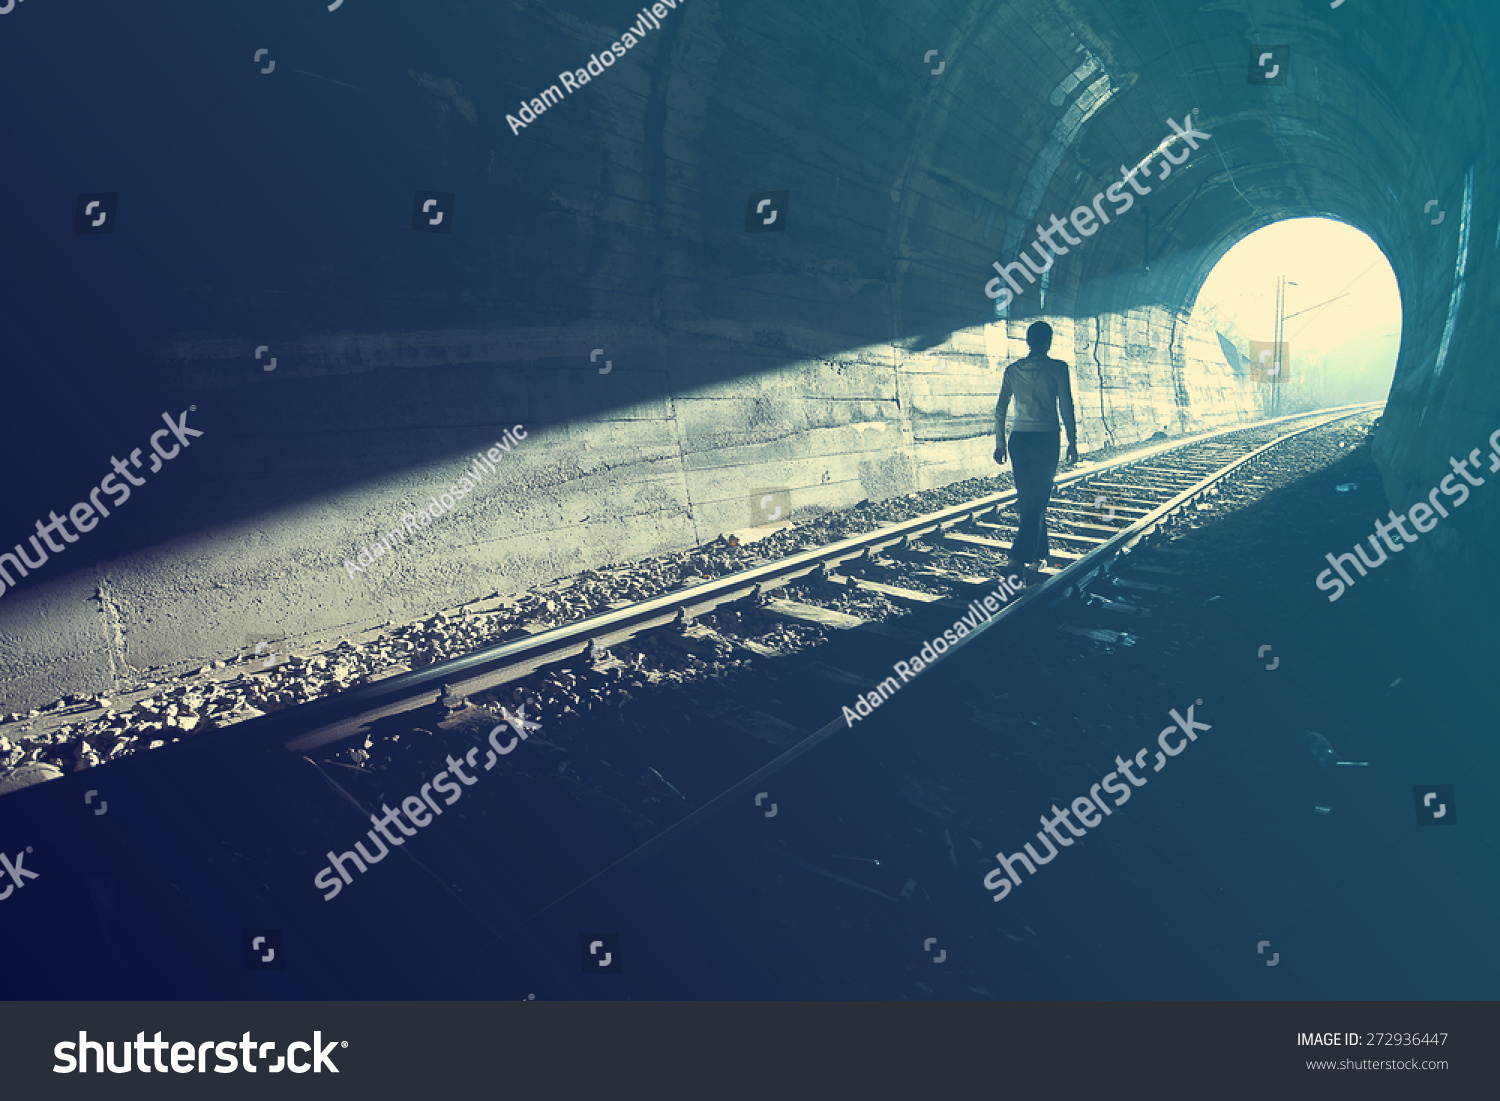 Exit from darkness - Light at end of tunnel #272936447